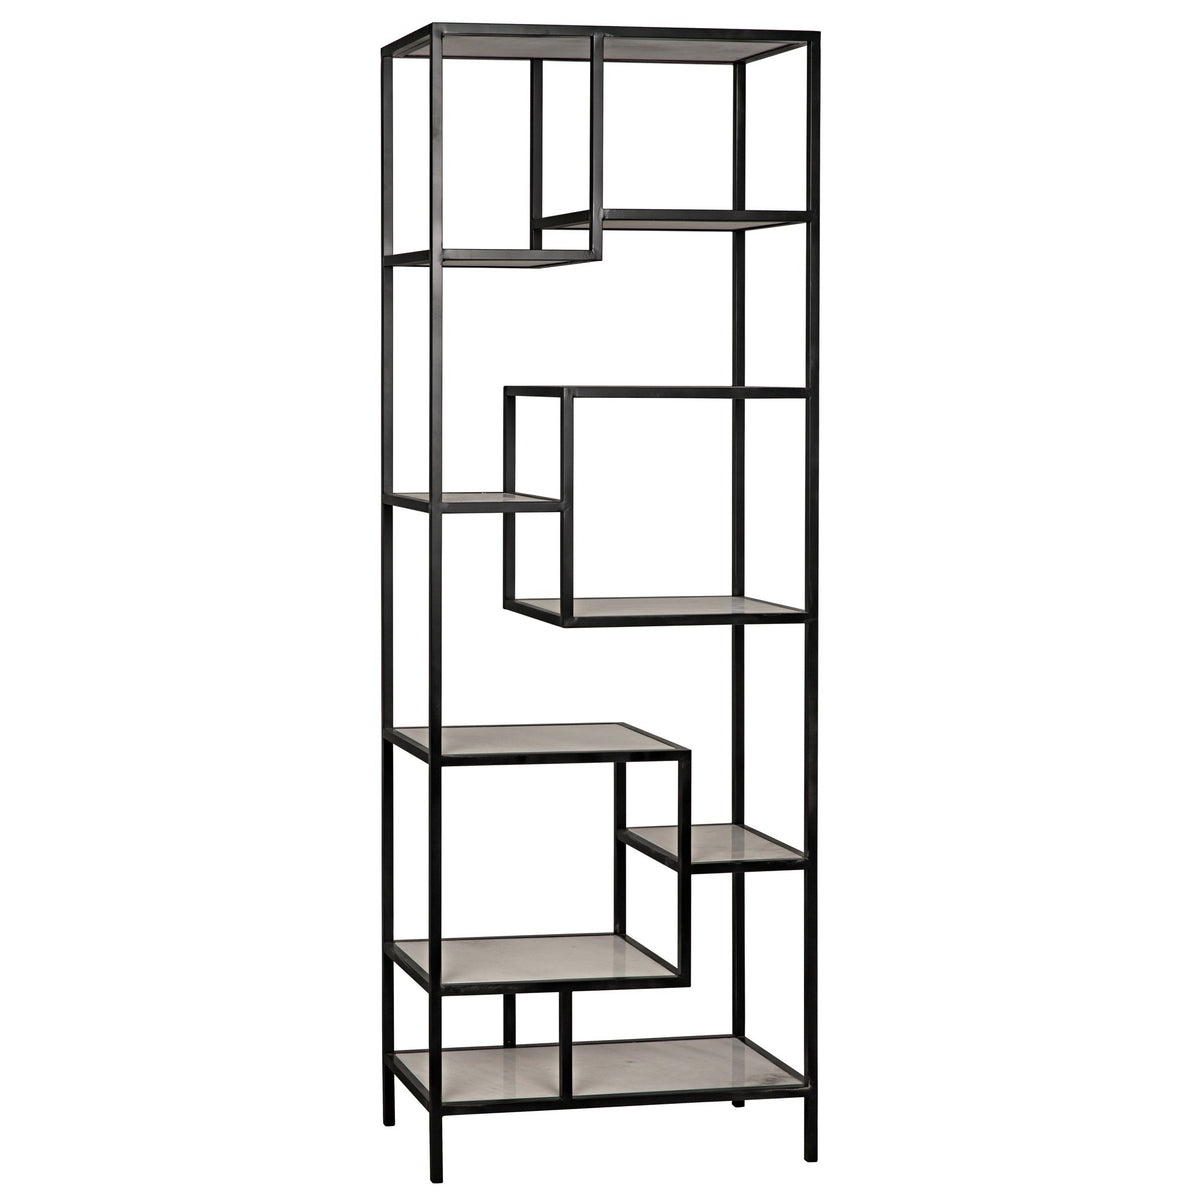 Haru Bookcase Large - Black Metal with White Stone